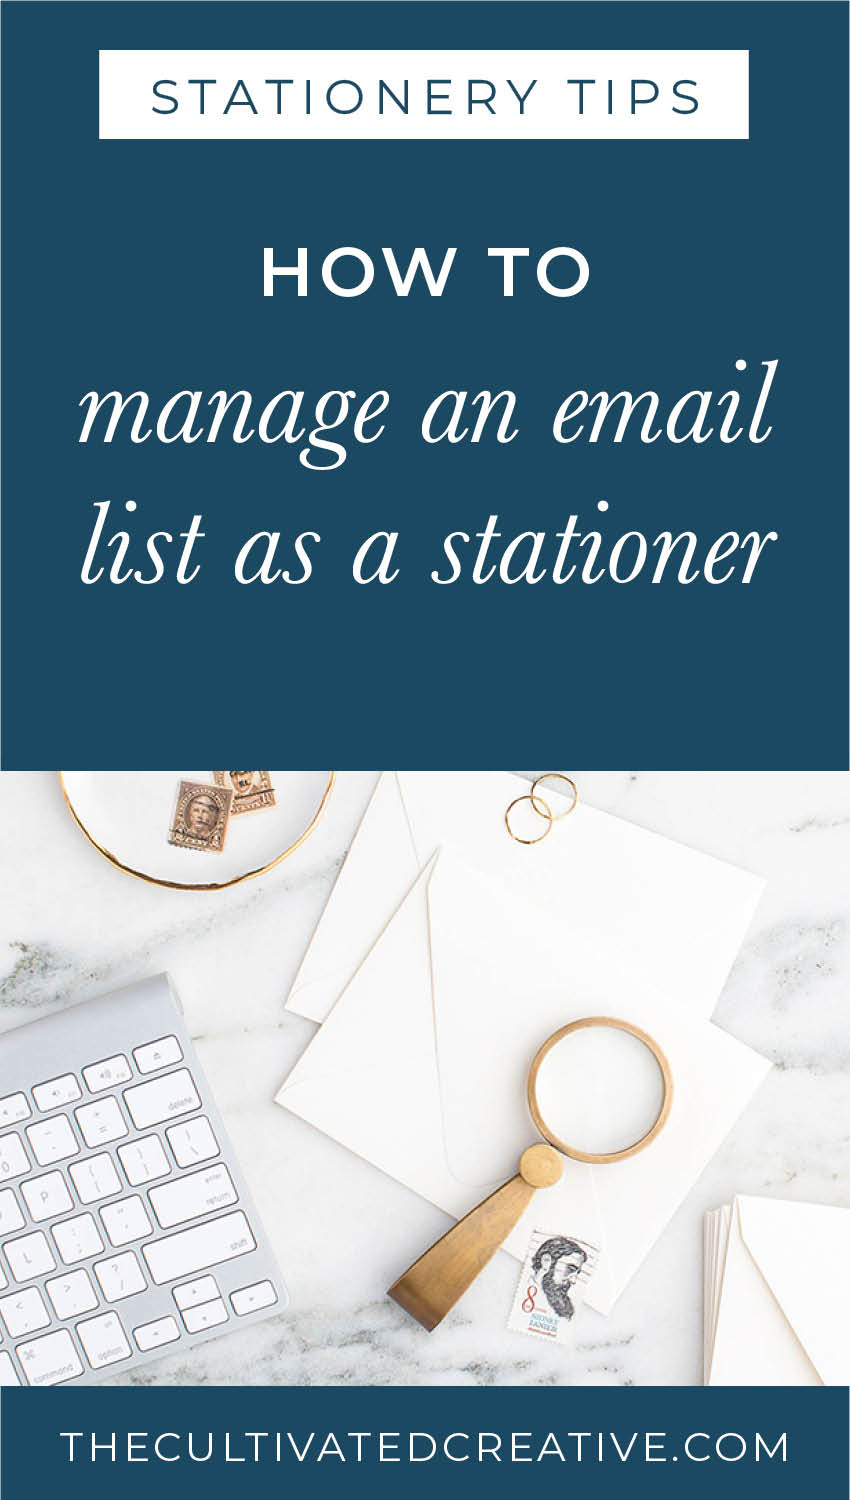 How to manage an email list as a stationer. Why you need one and what you should do with it.